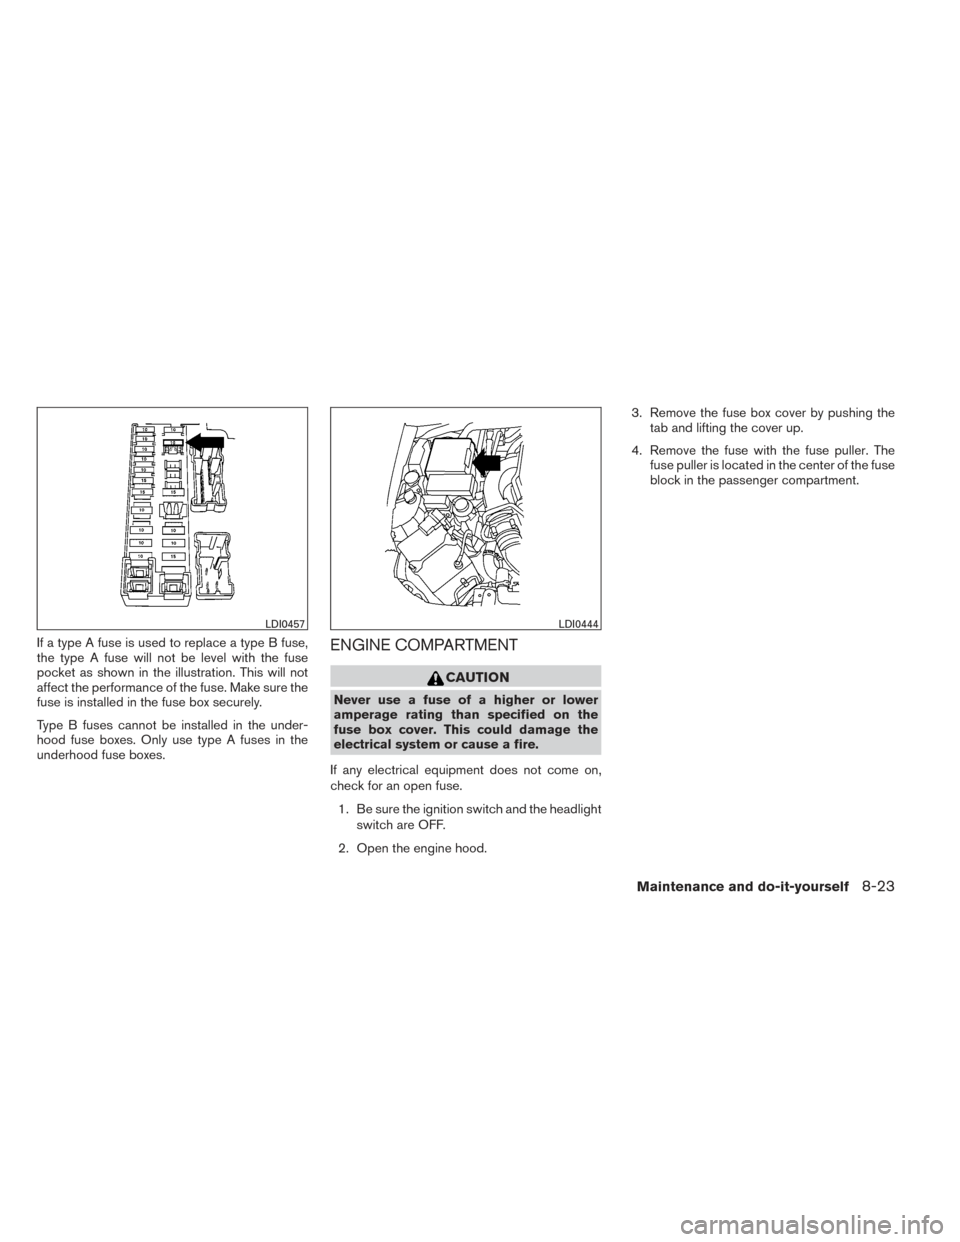 NISSAN XTERRA 2014 N50 / 2.G Owners Manual If a type A fuse is used to replace a type B fuse,
the type A fuse will not be level with the fuse
pocket as shown in the illustration. This will not
affect the performance of the fuse. Make sure the
